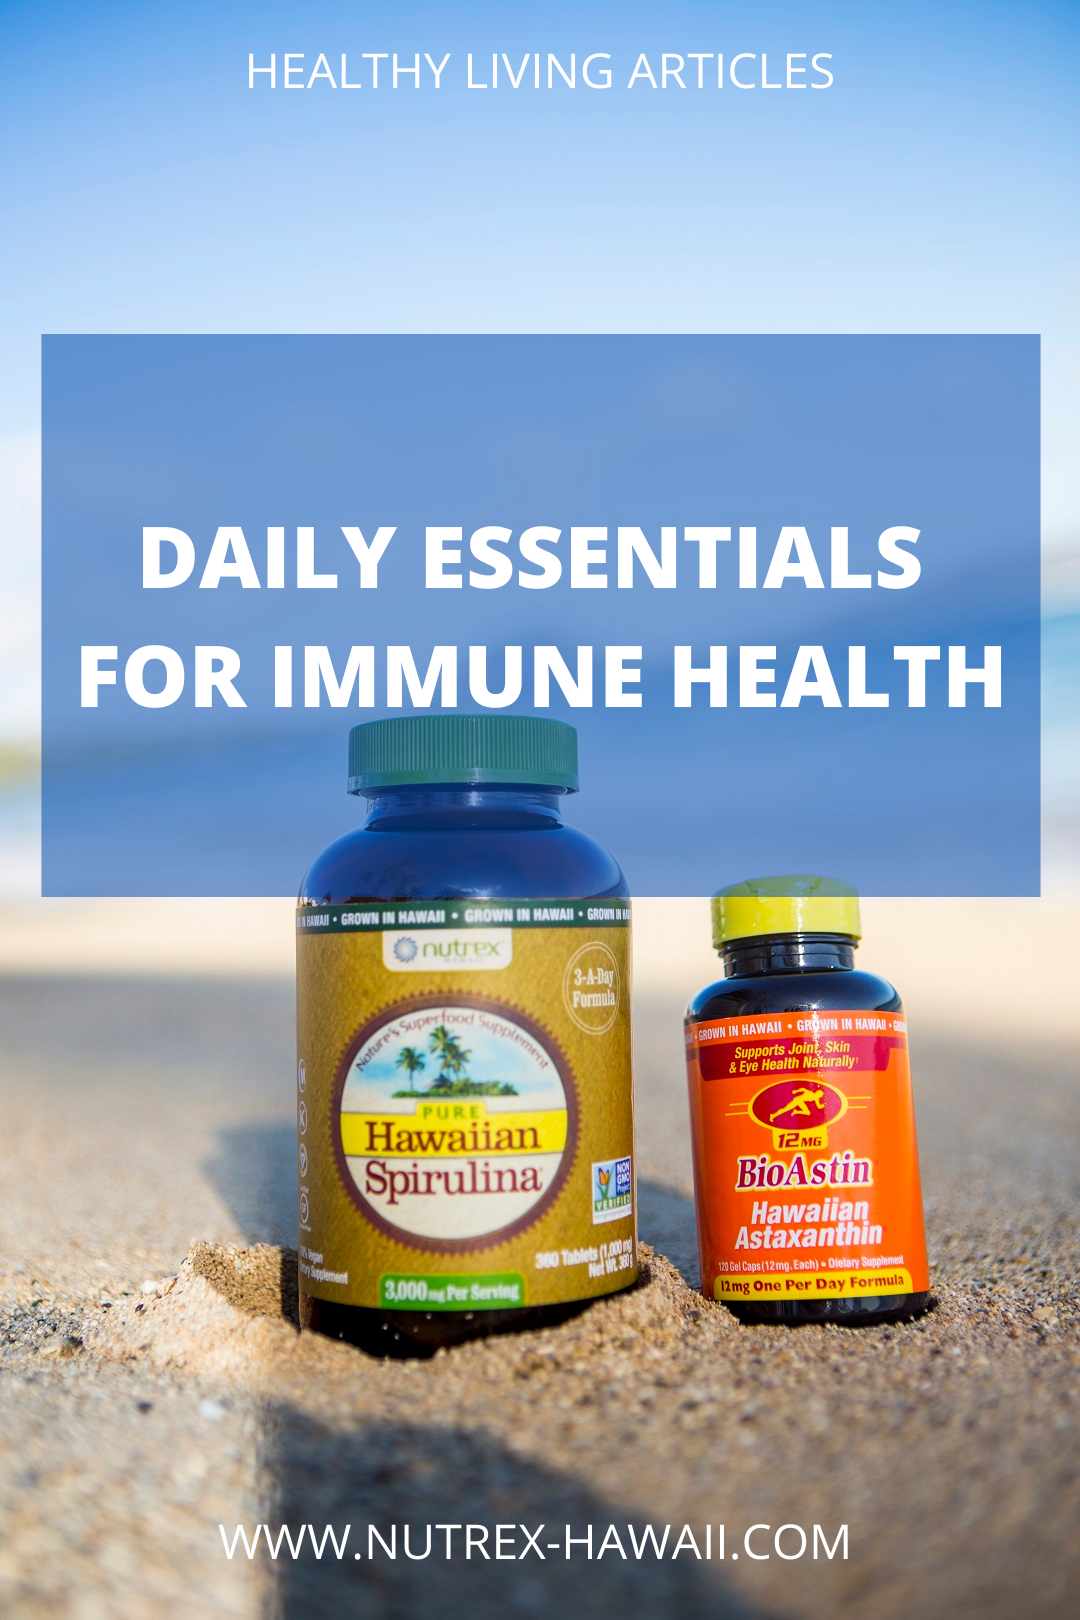 The Daily Essentials for Immune Health